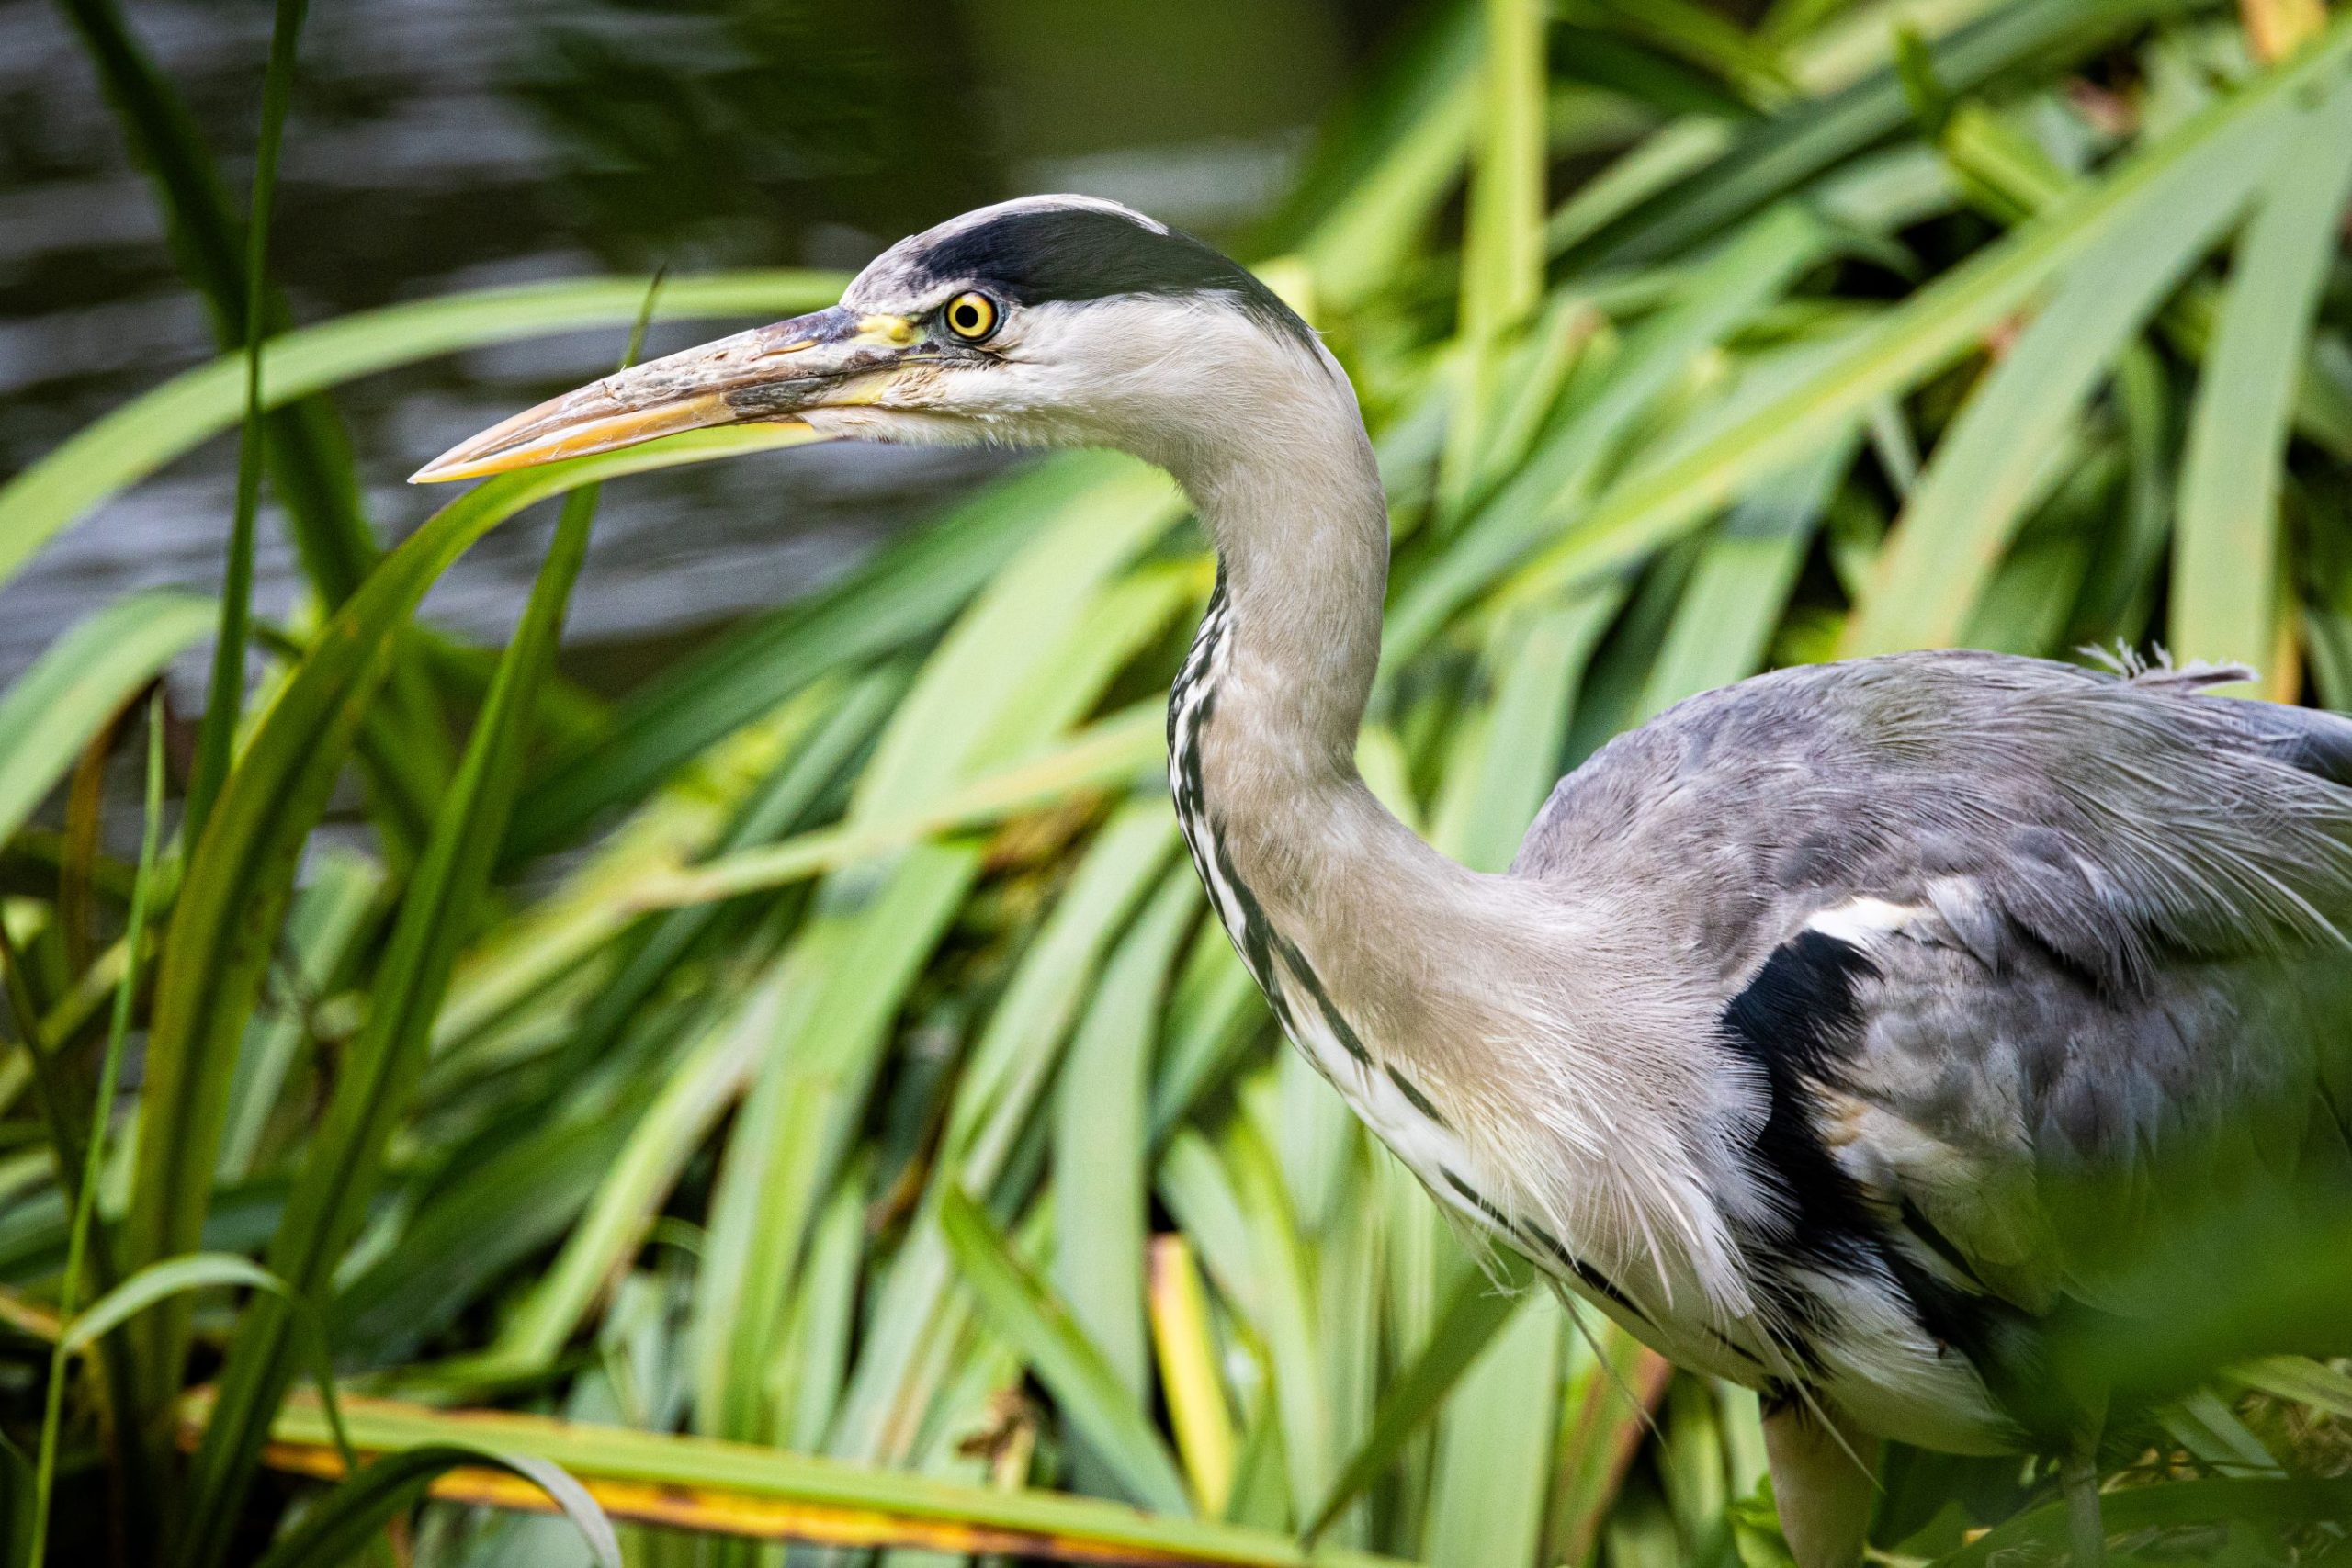 A Grey Heron in the reeds at the edge of the river